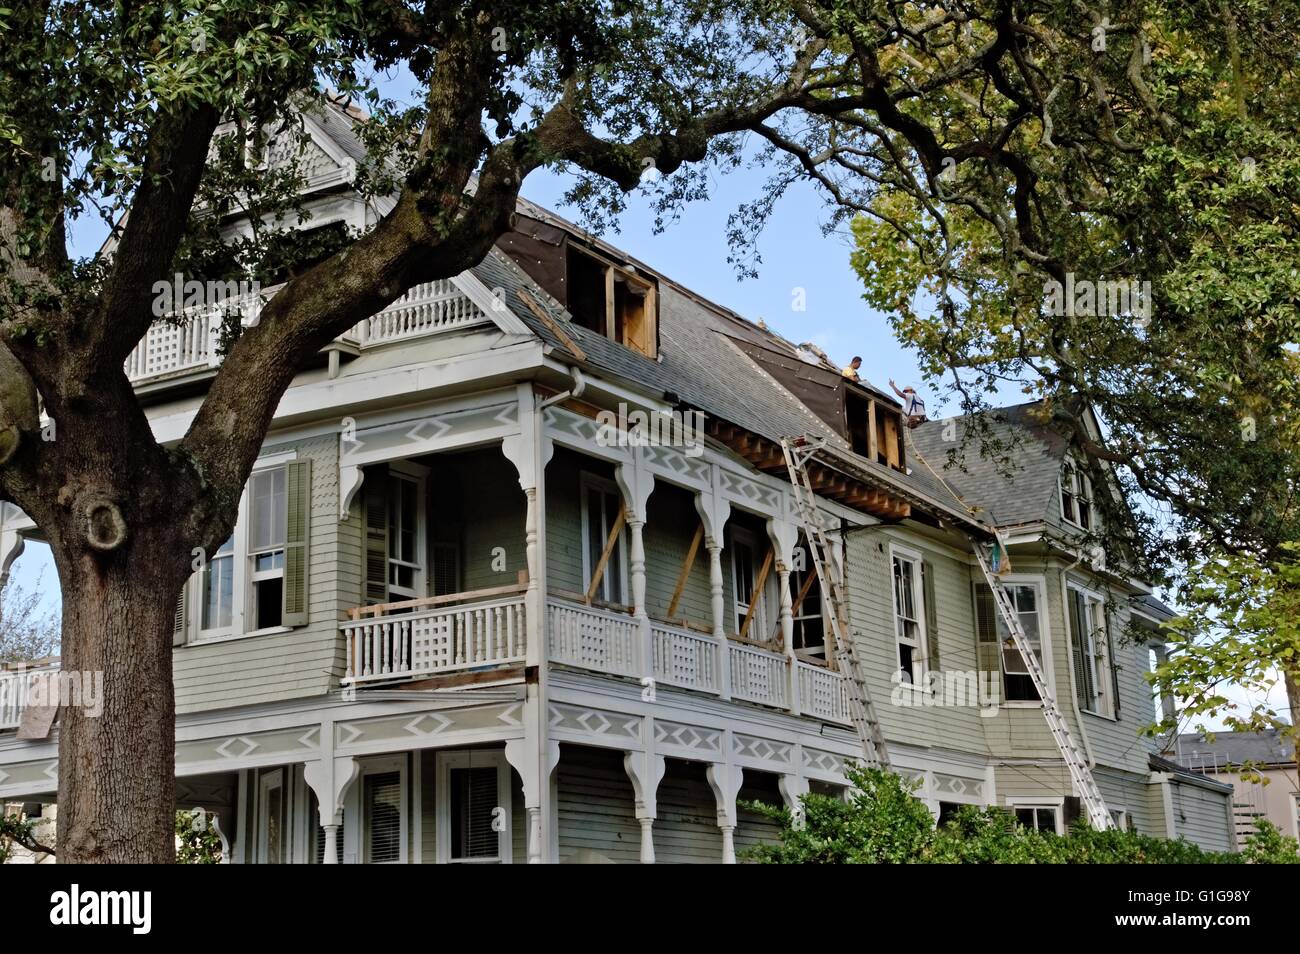 Vintage historic homes in the Garden district of New Orleans Louisiana Stock Photo